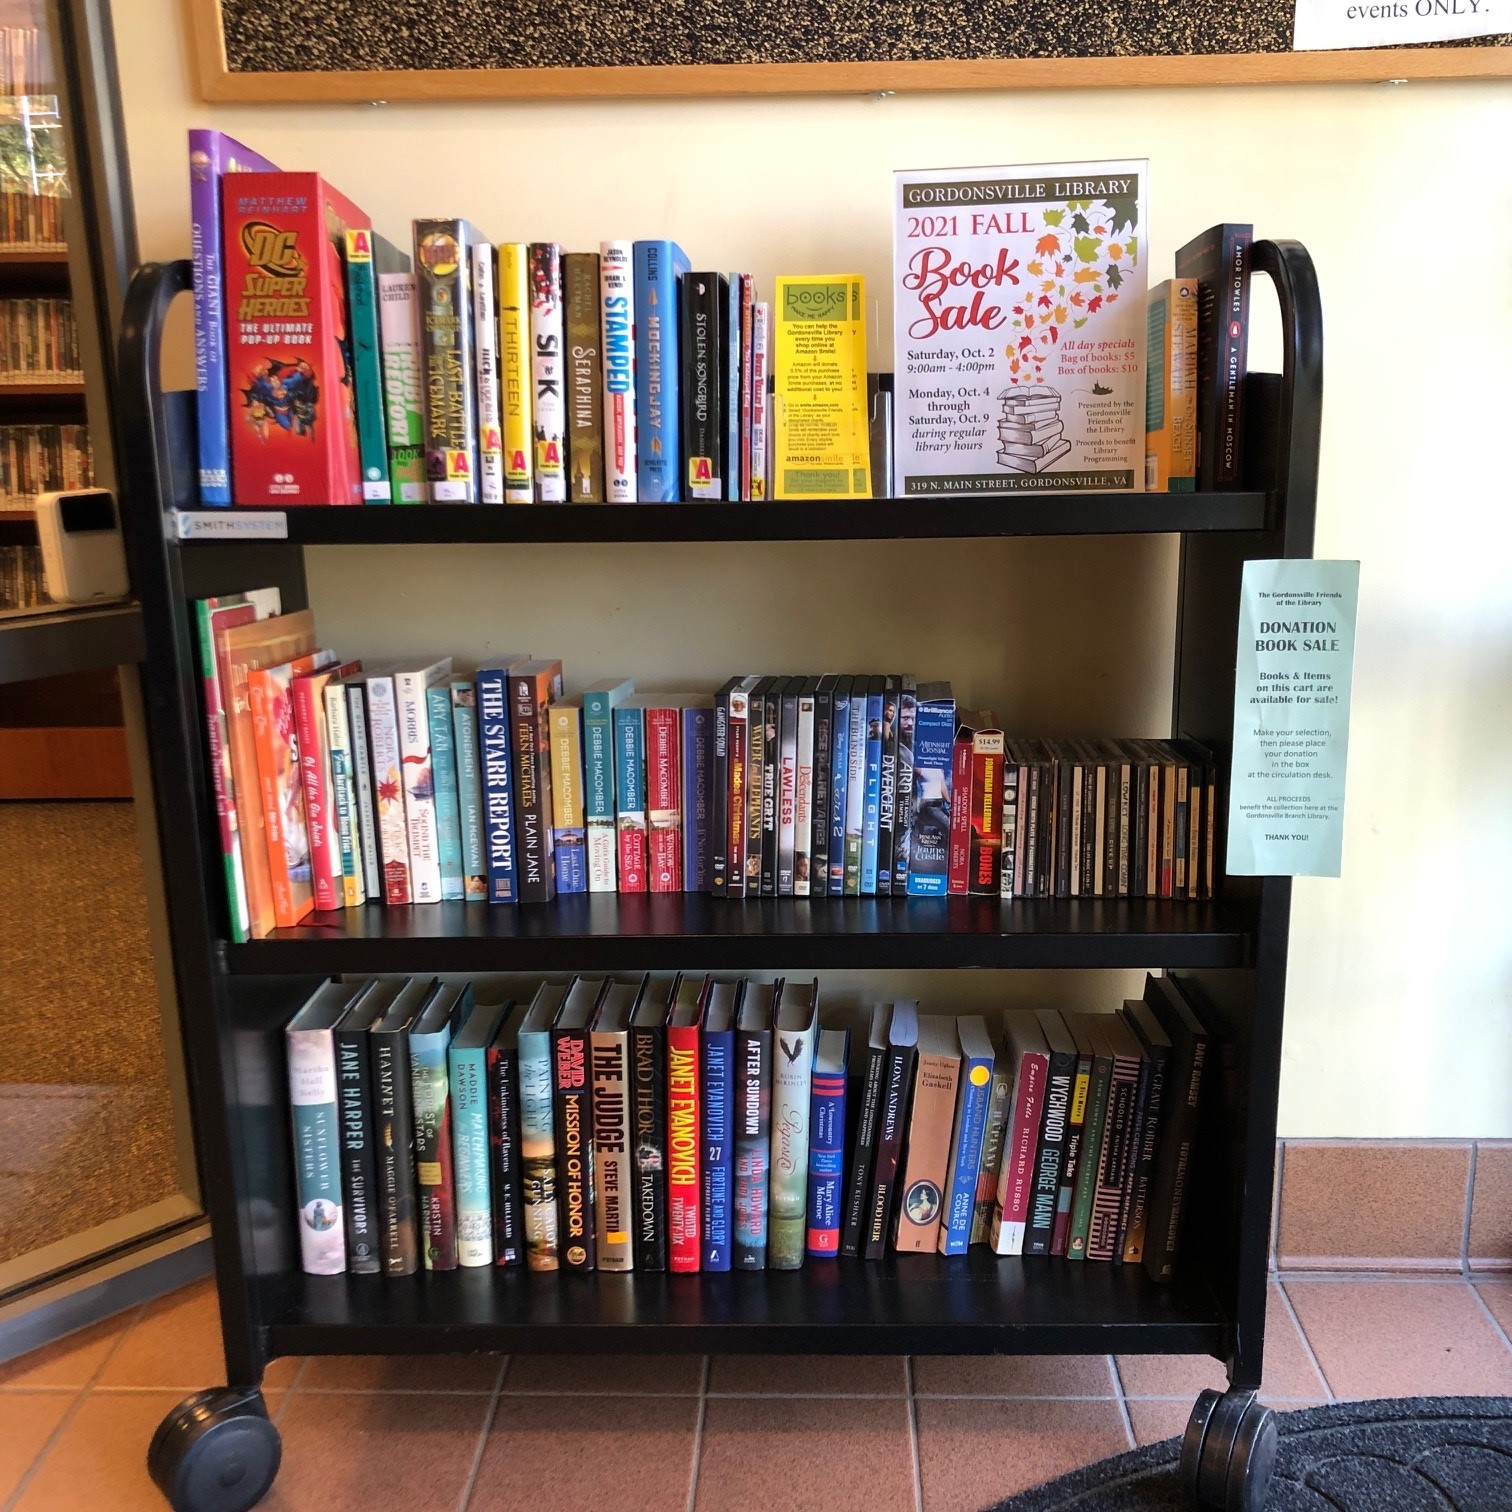 Picture of booksale cart at Gordonsville Library